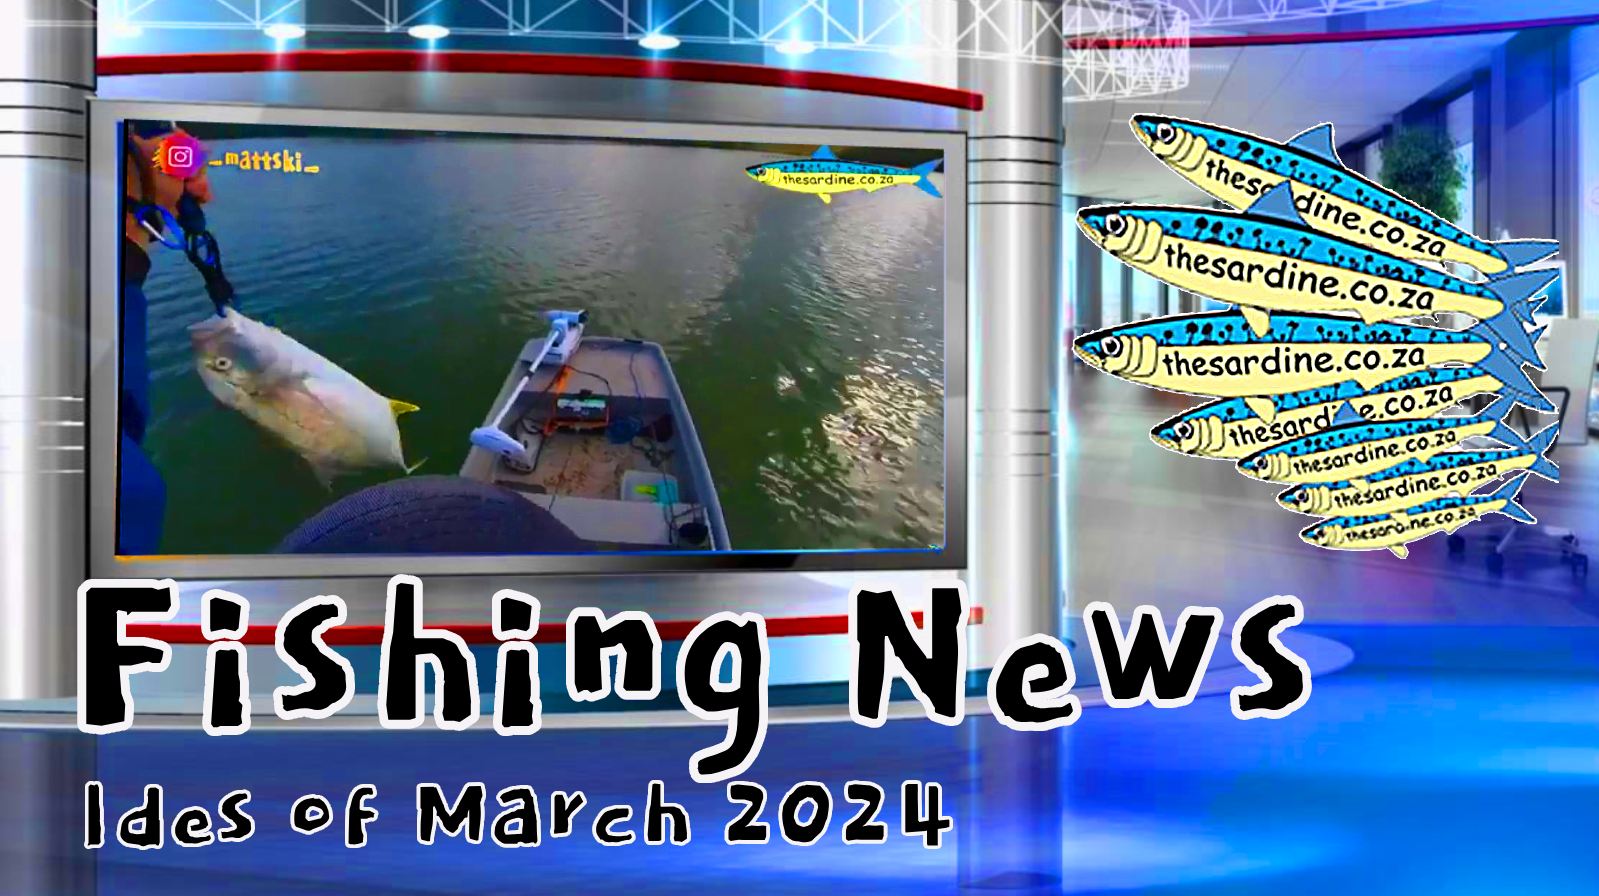 Fishing News by The Sardine Ides of March 2024